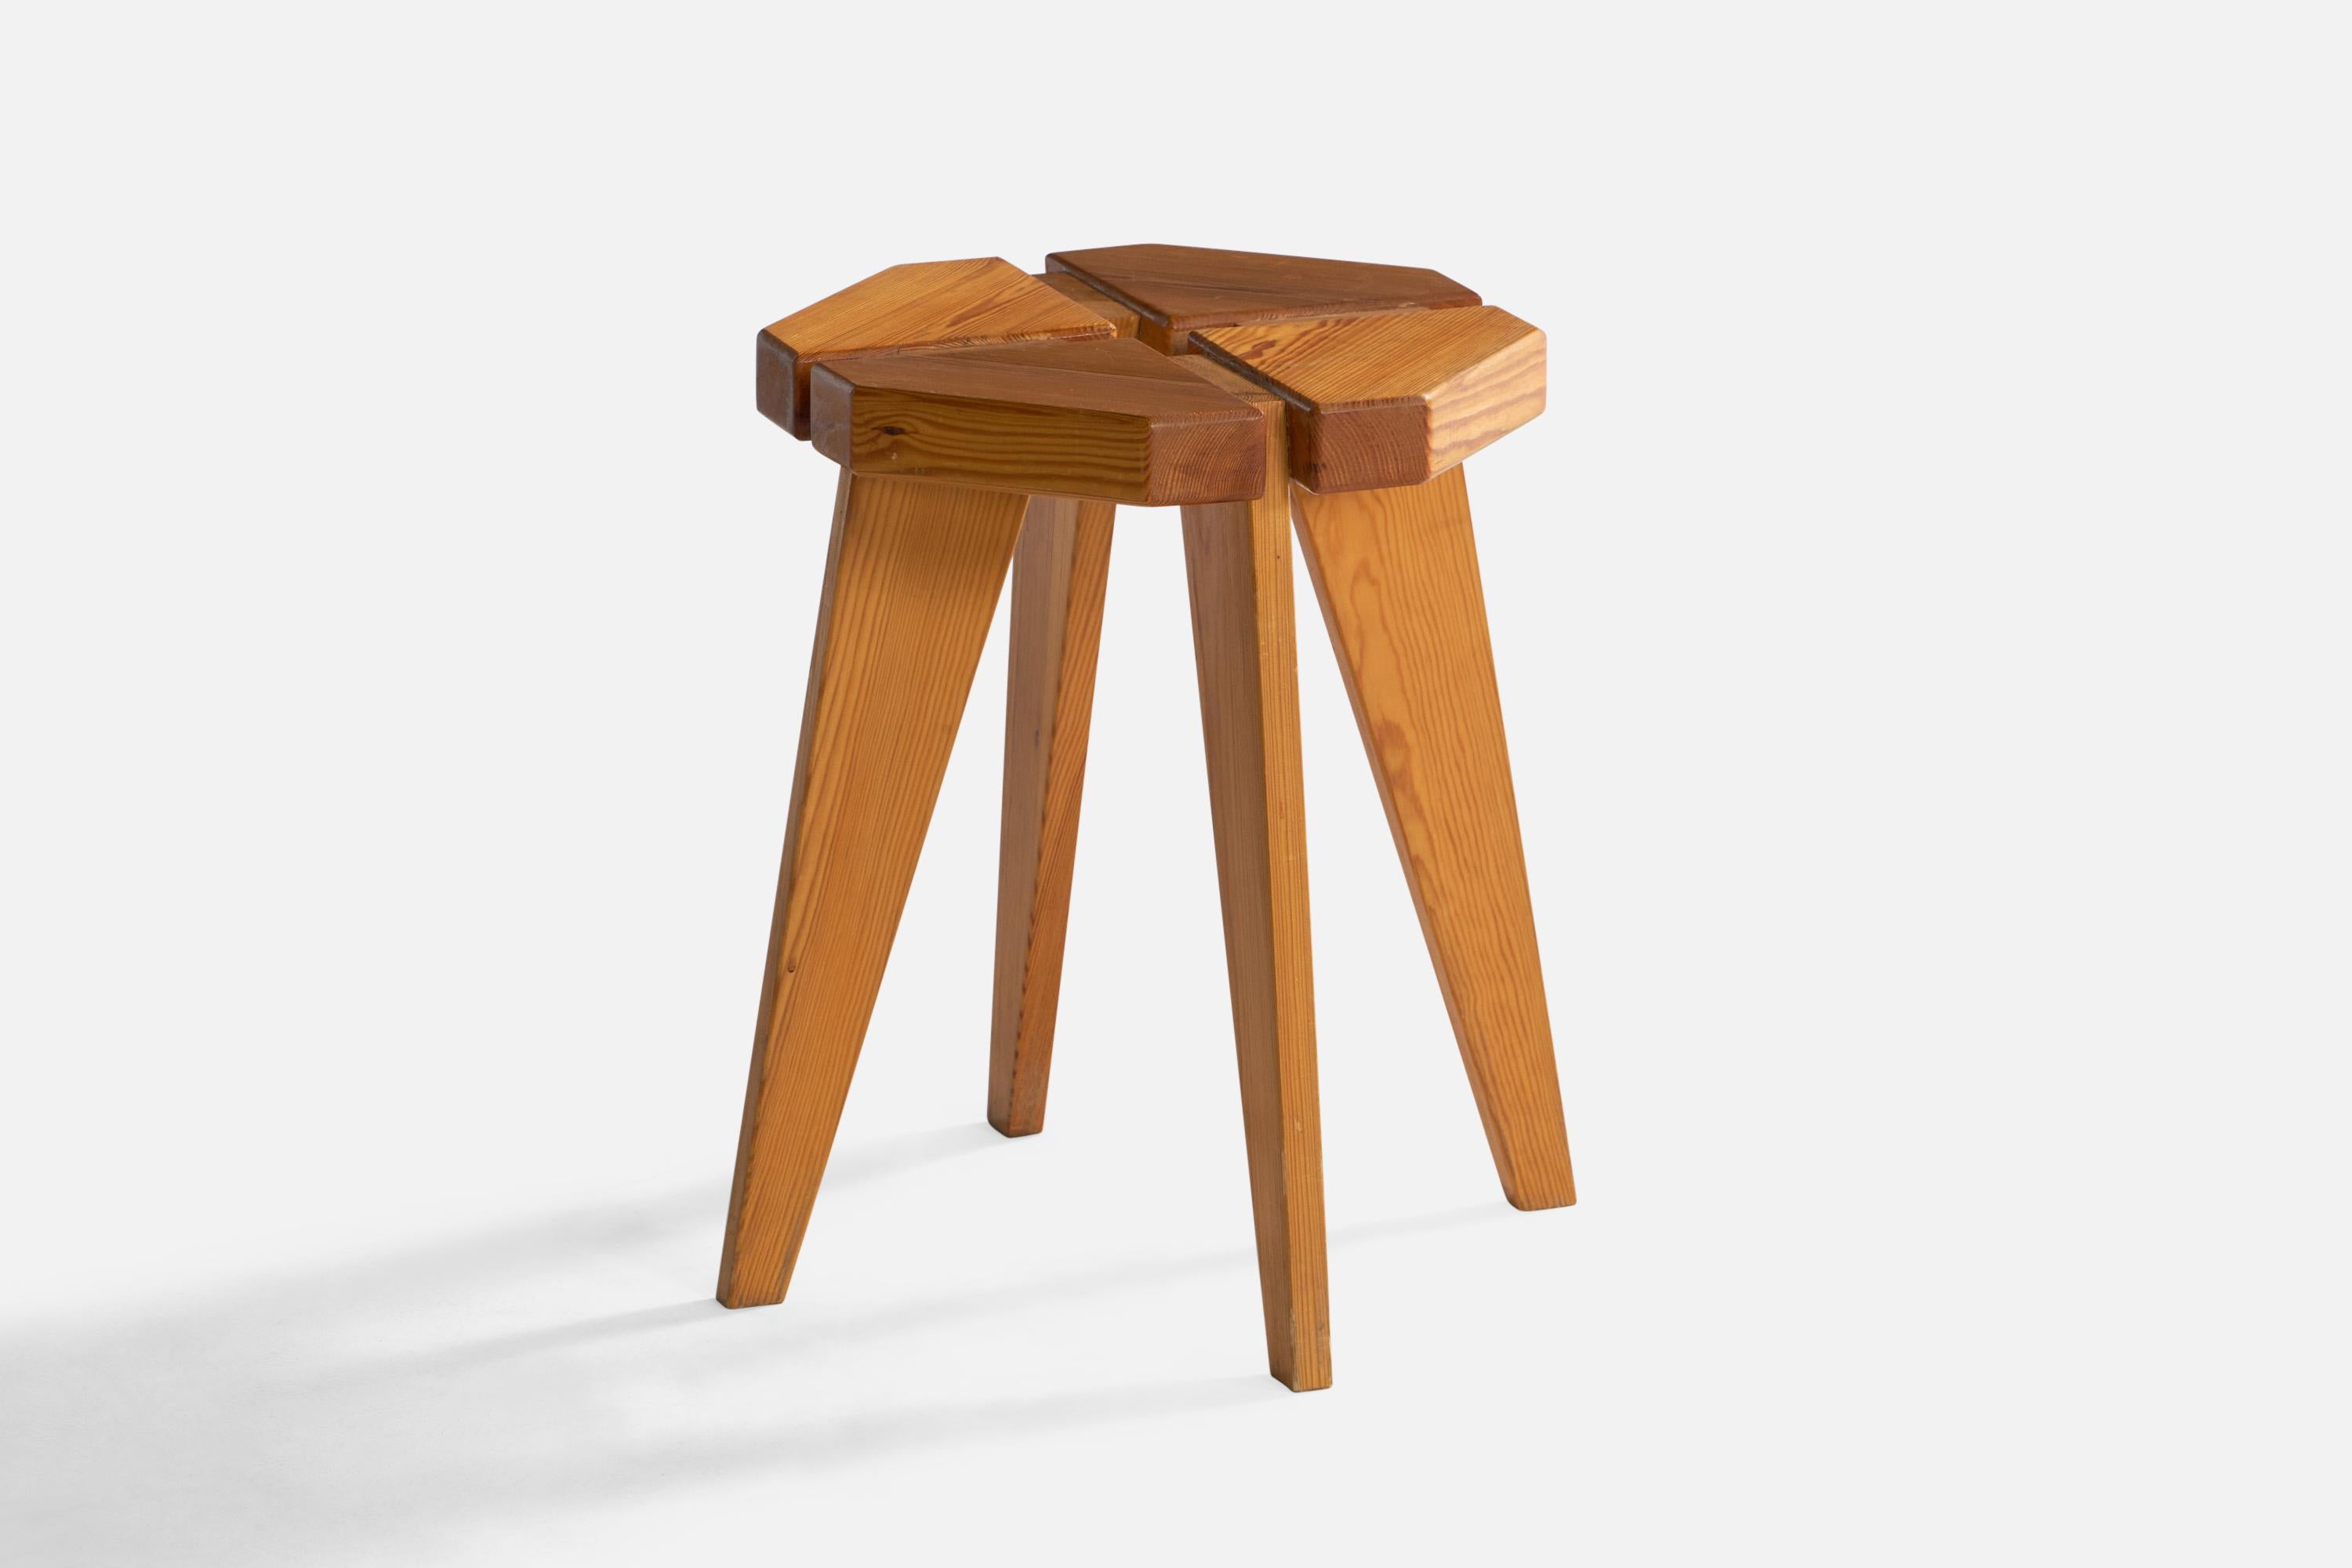 A pine stool designed and produced in Sweden, 1970s.

seat height: 17.1”